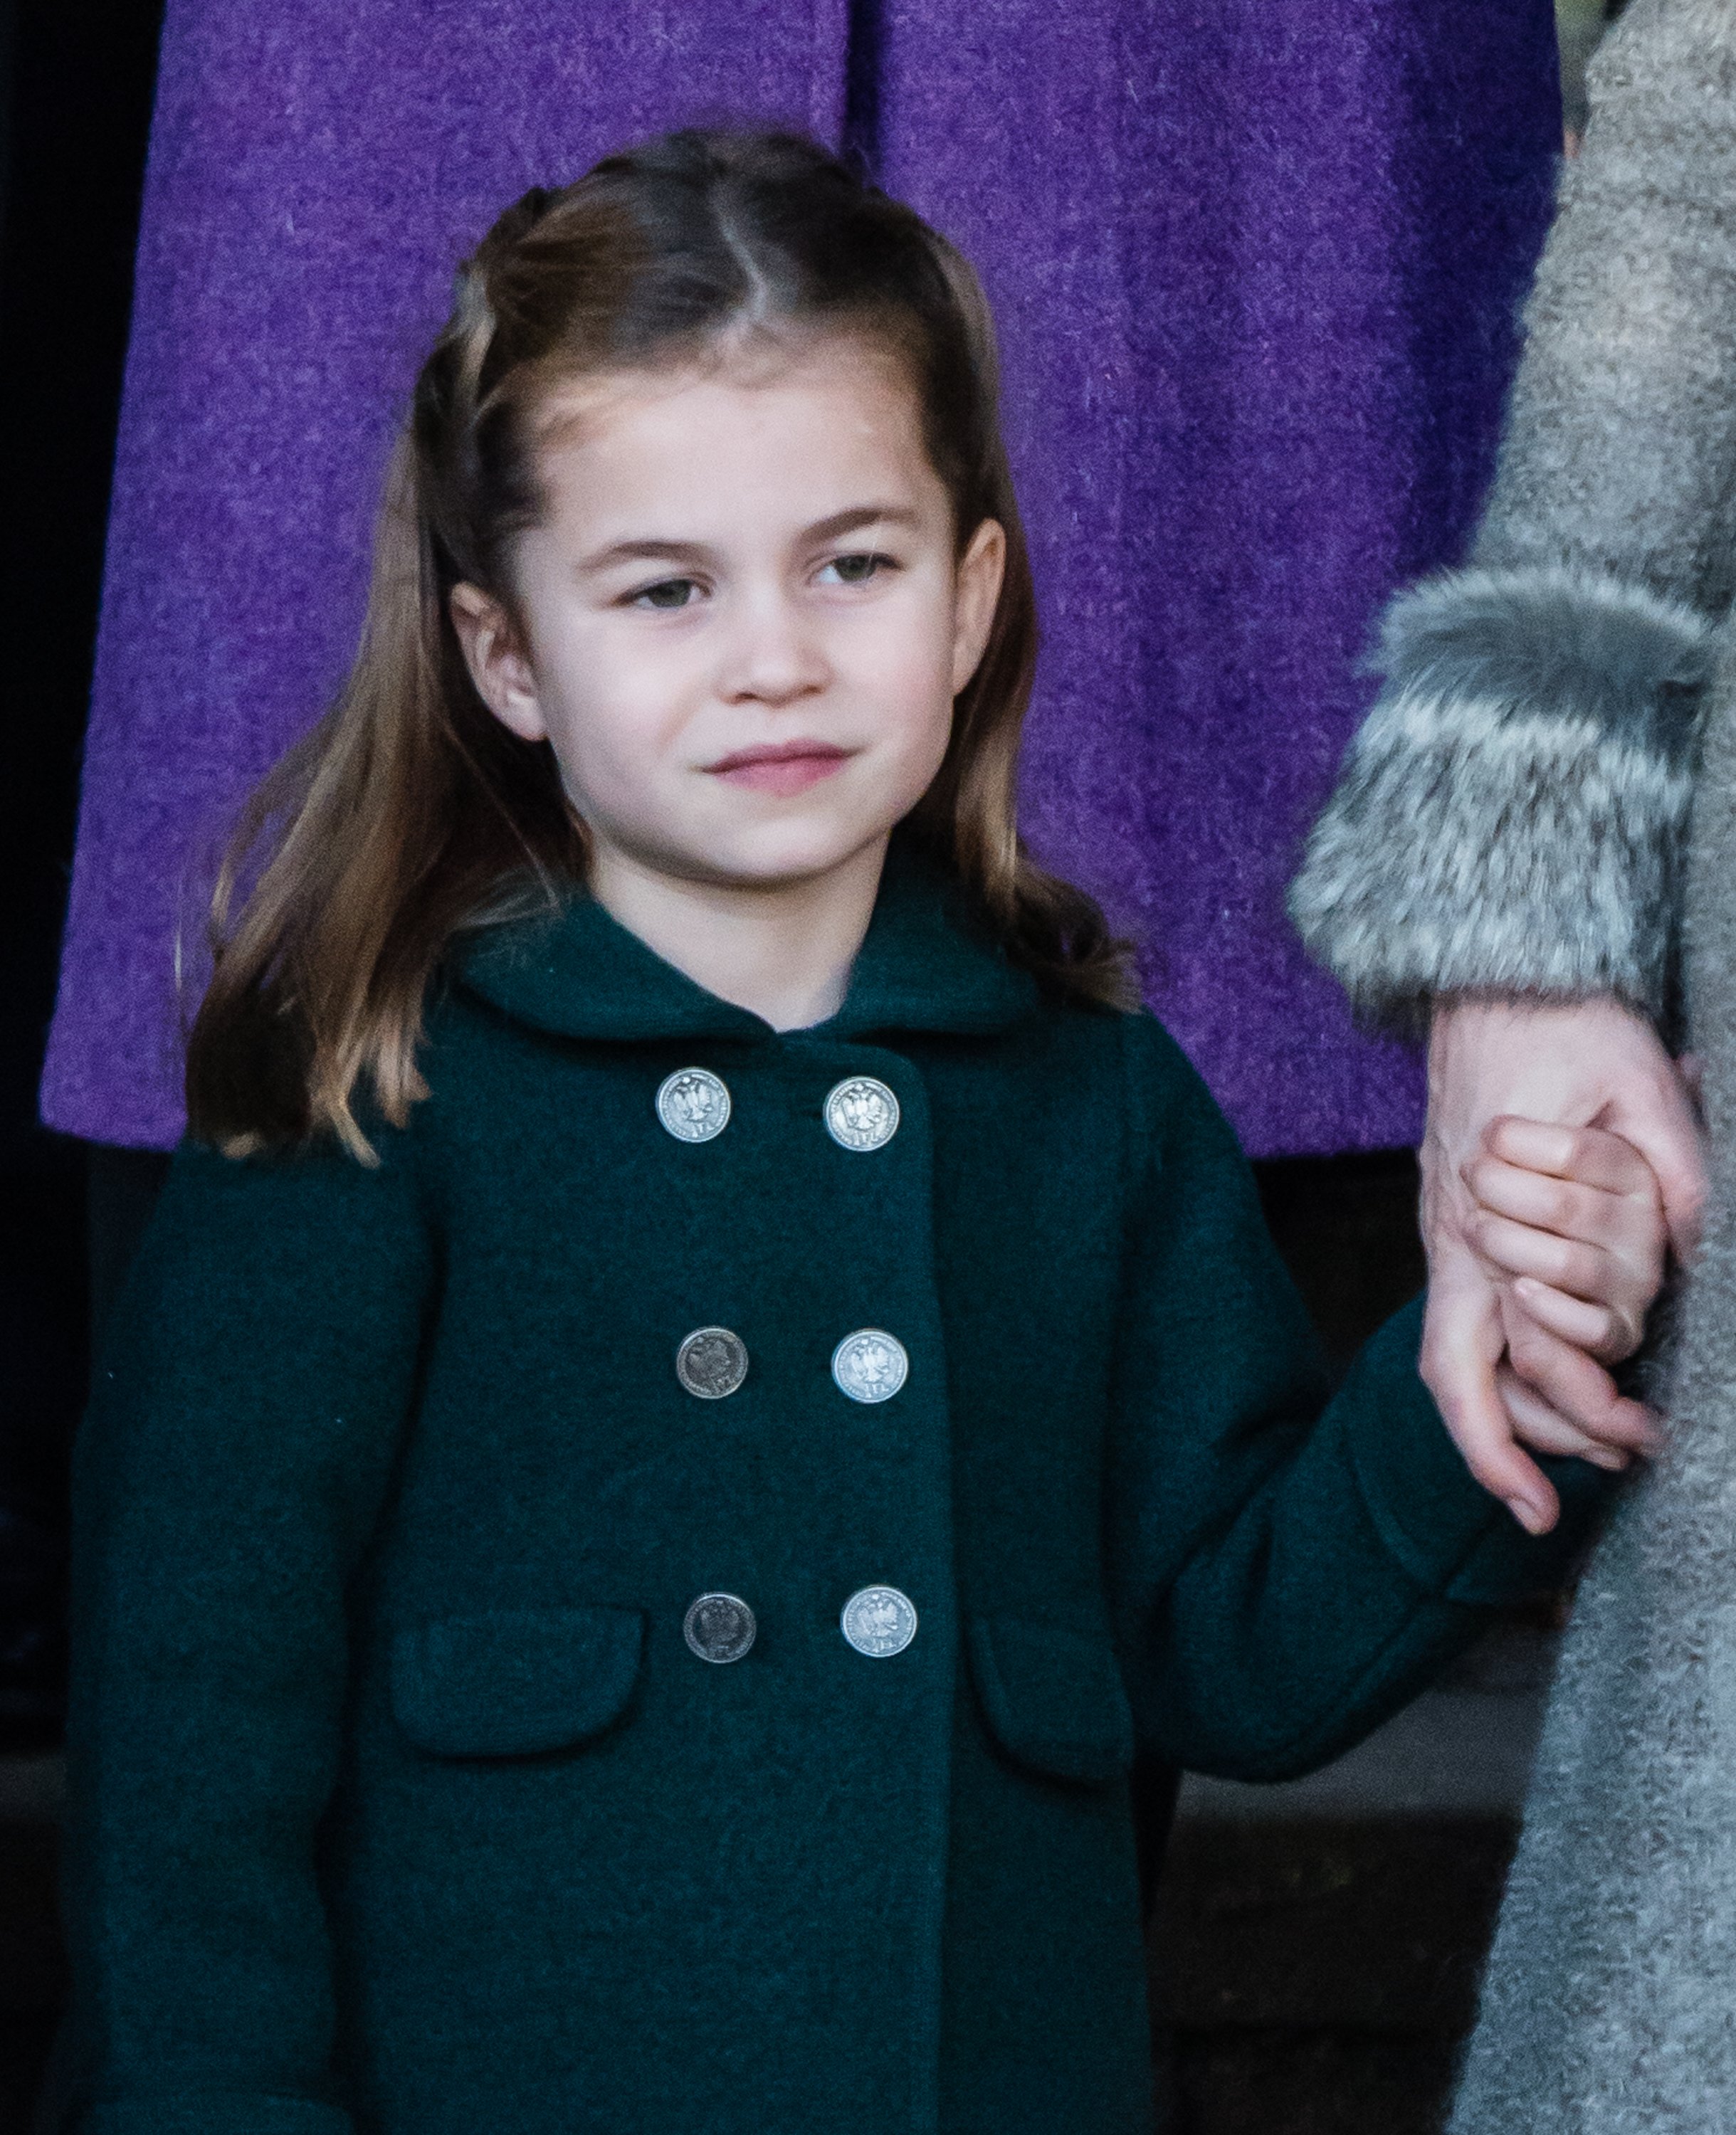 Princess Charlotte attends the Christmas Day Church Service on the Sandringham estate on December 25, 2019 | Photo: Getty Images